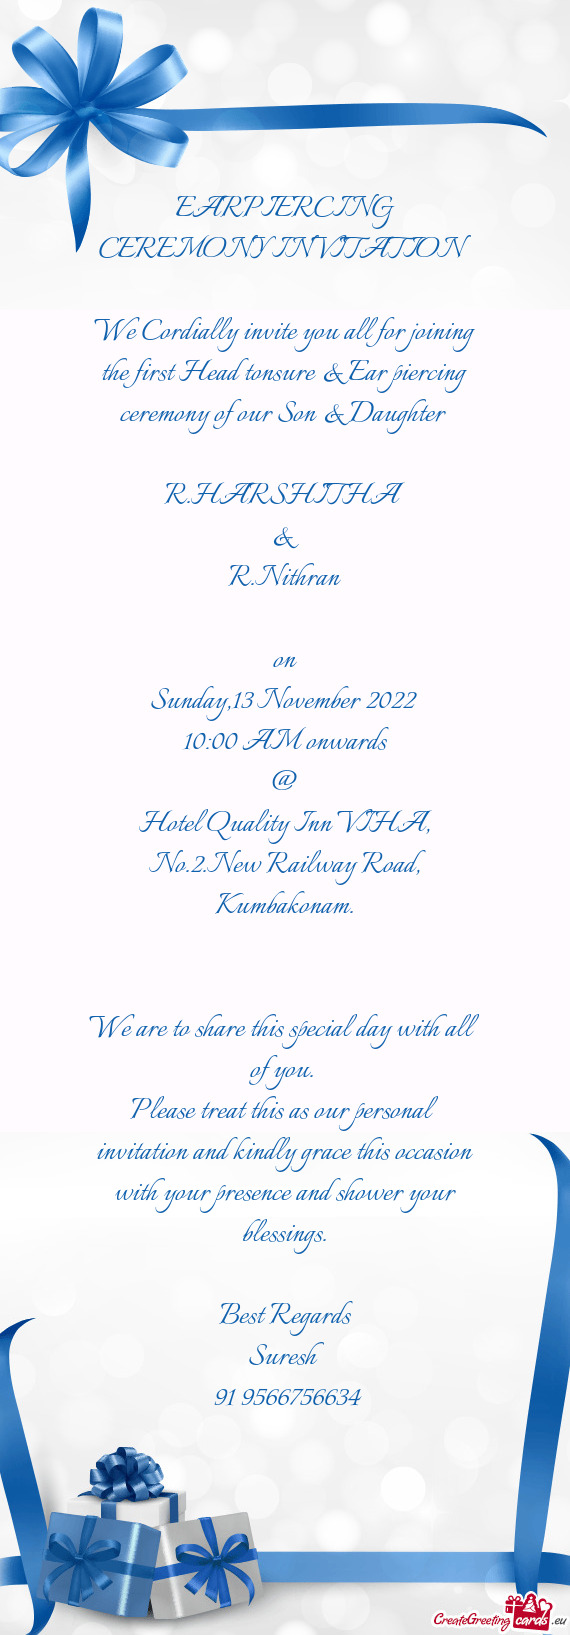 We Cordially invite you all for joining the first Head tonsure & Ear piercing ceremony of our Son &